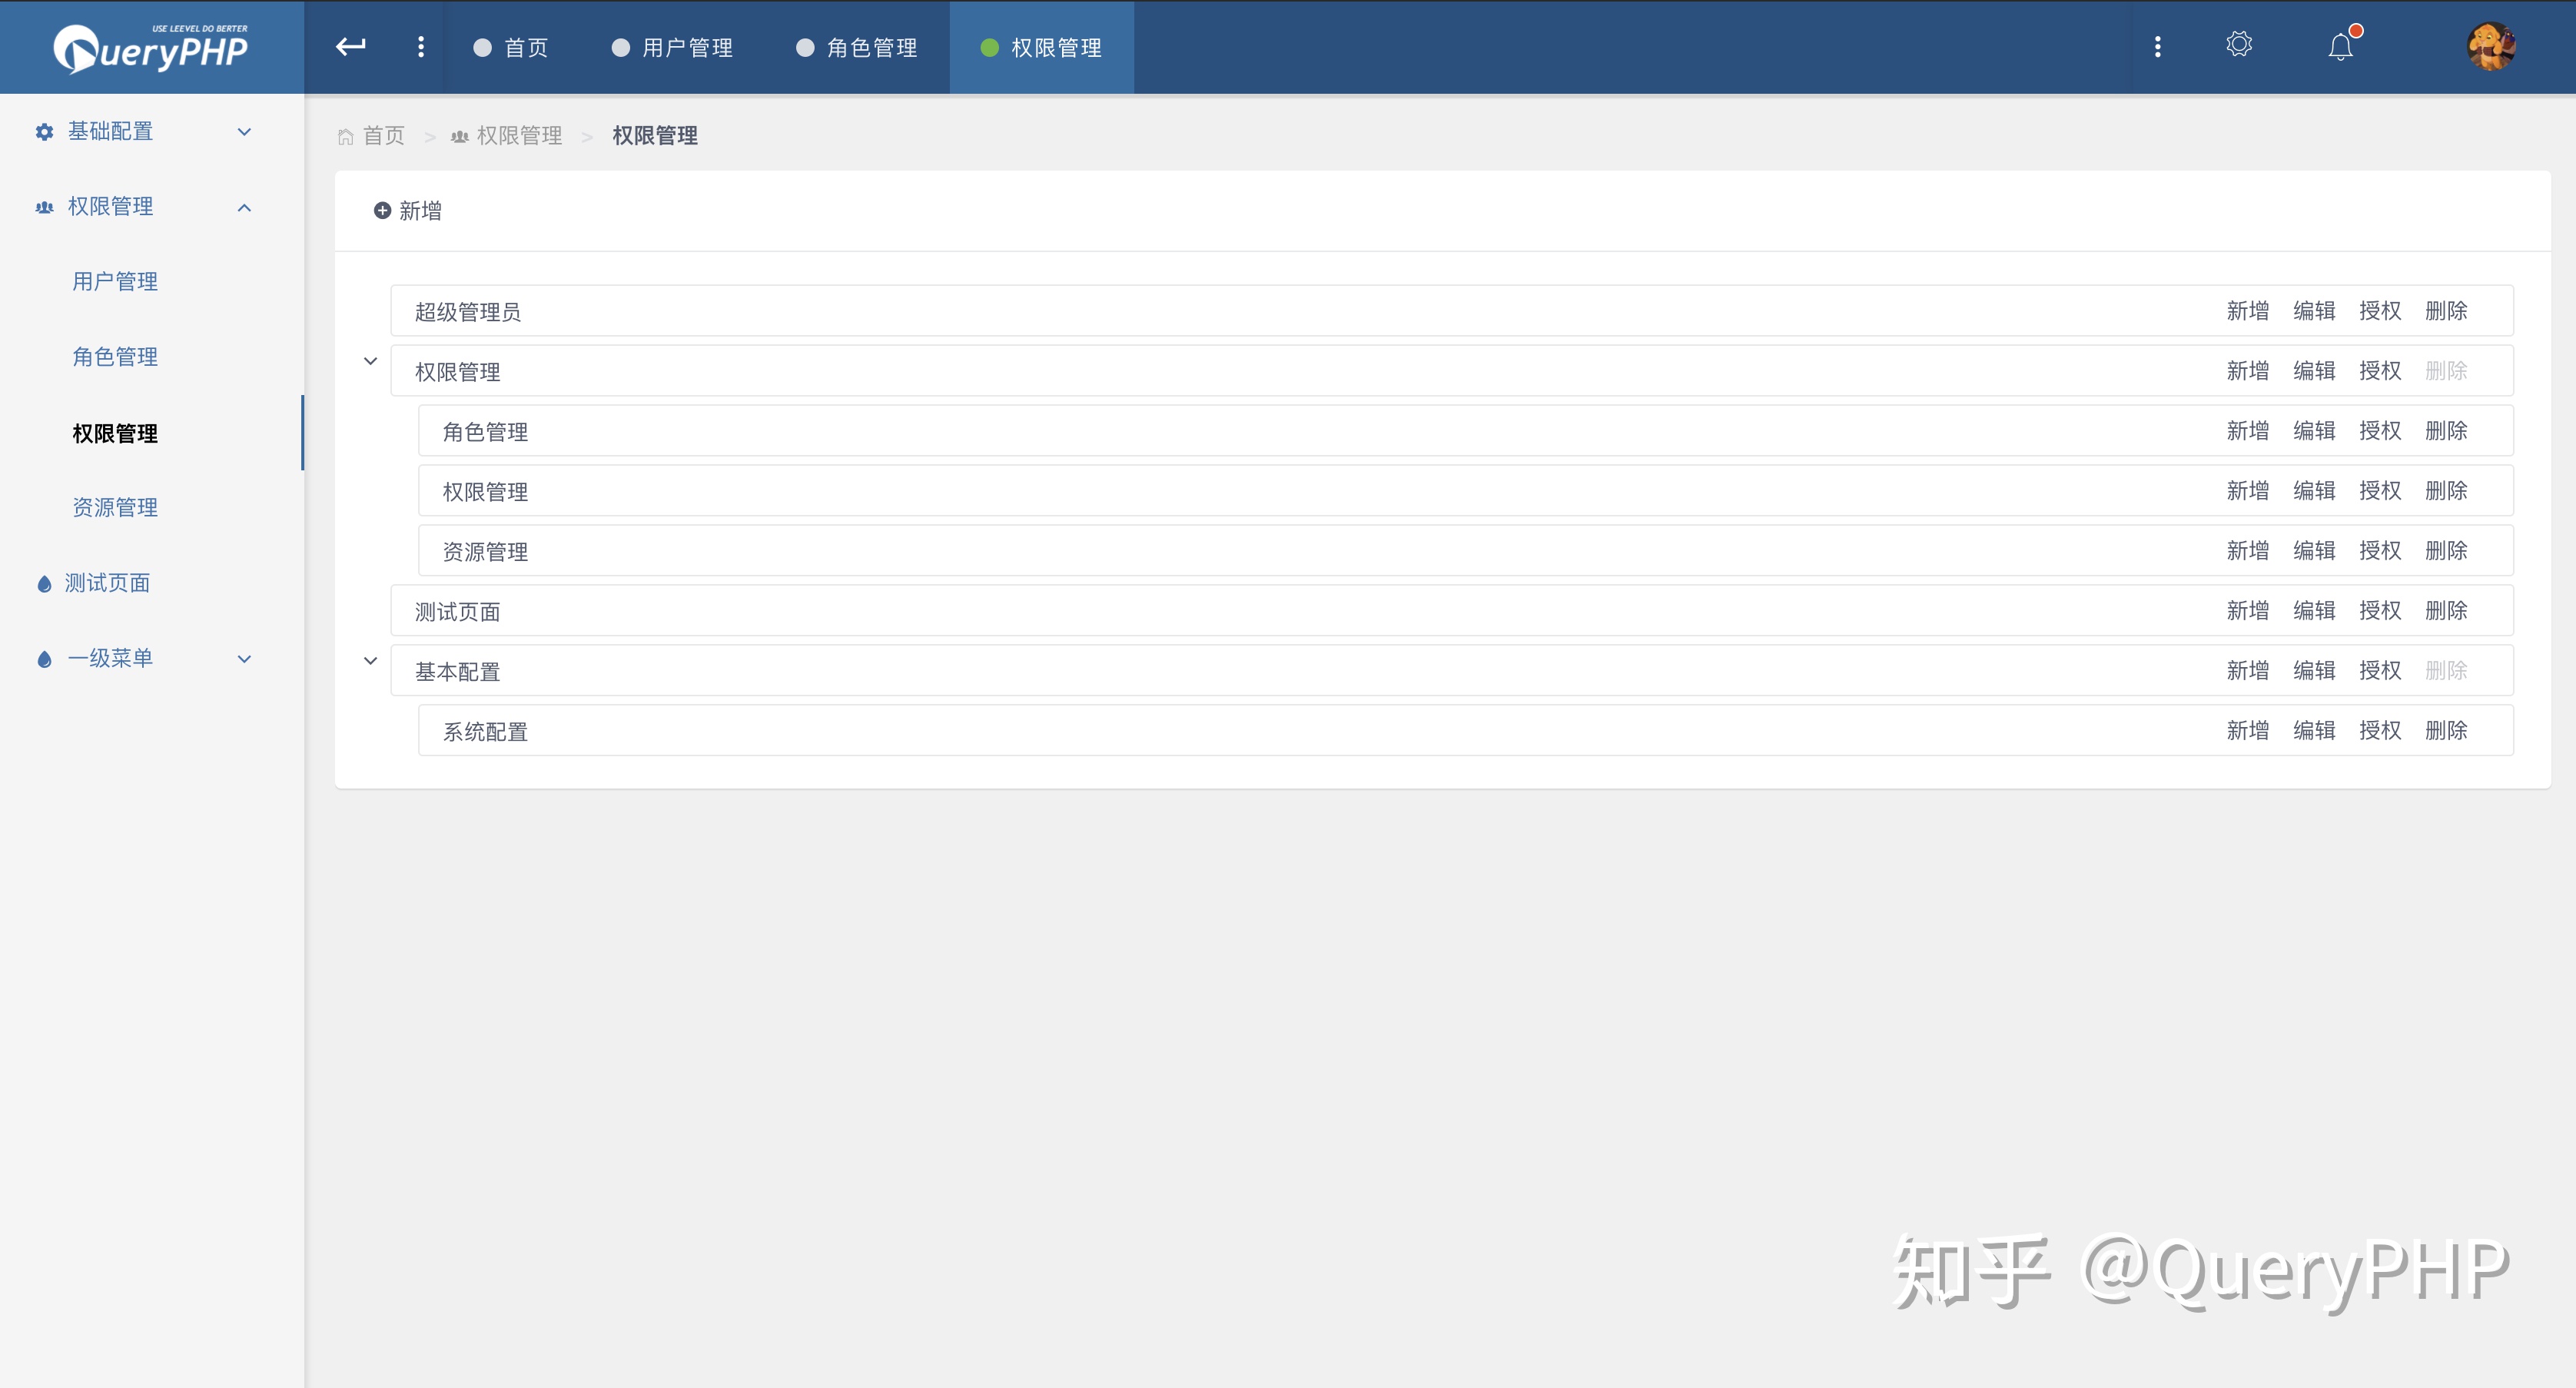 PHP 框架 QueryPHP 1.0.3 发布，兼容 PHP 8.0 和 PHP 8.1